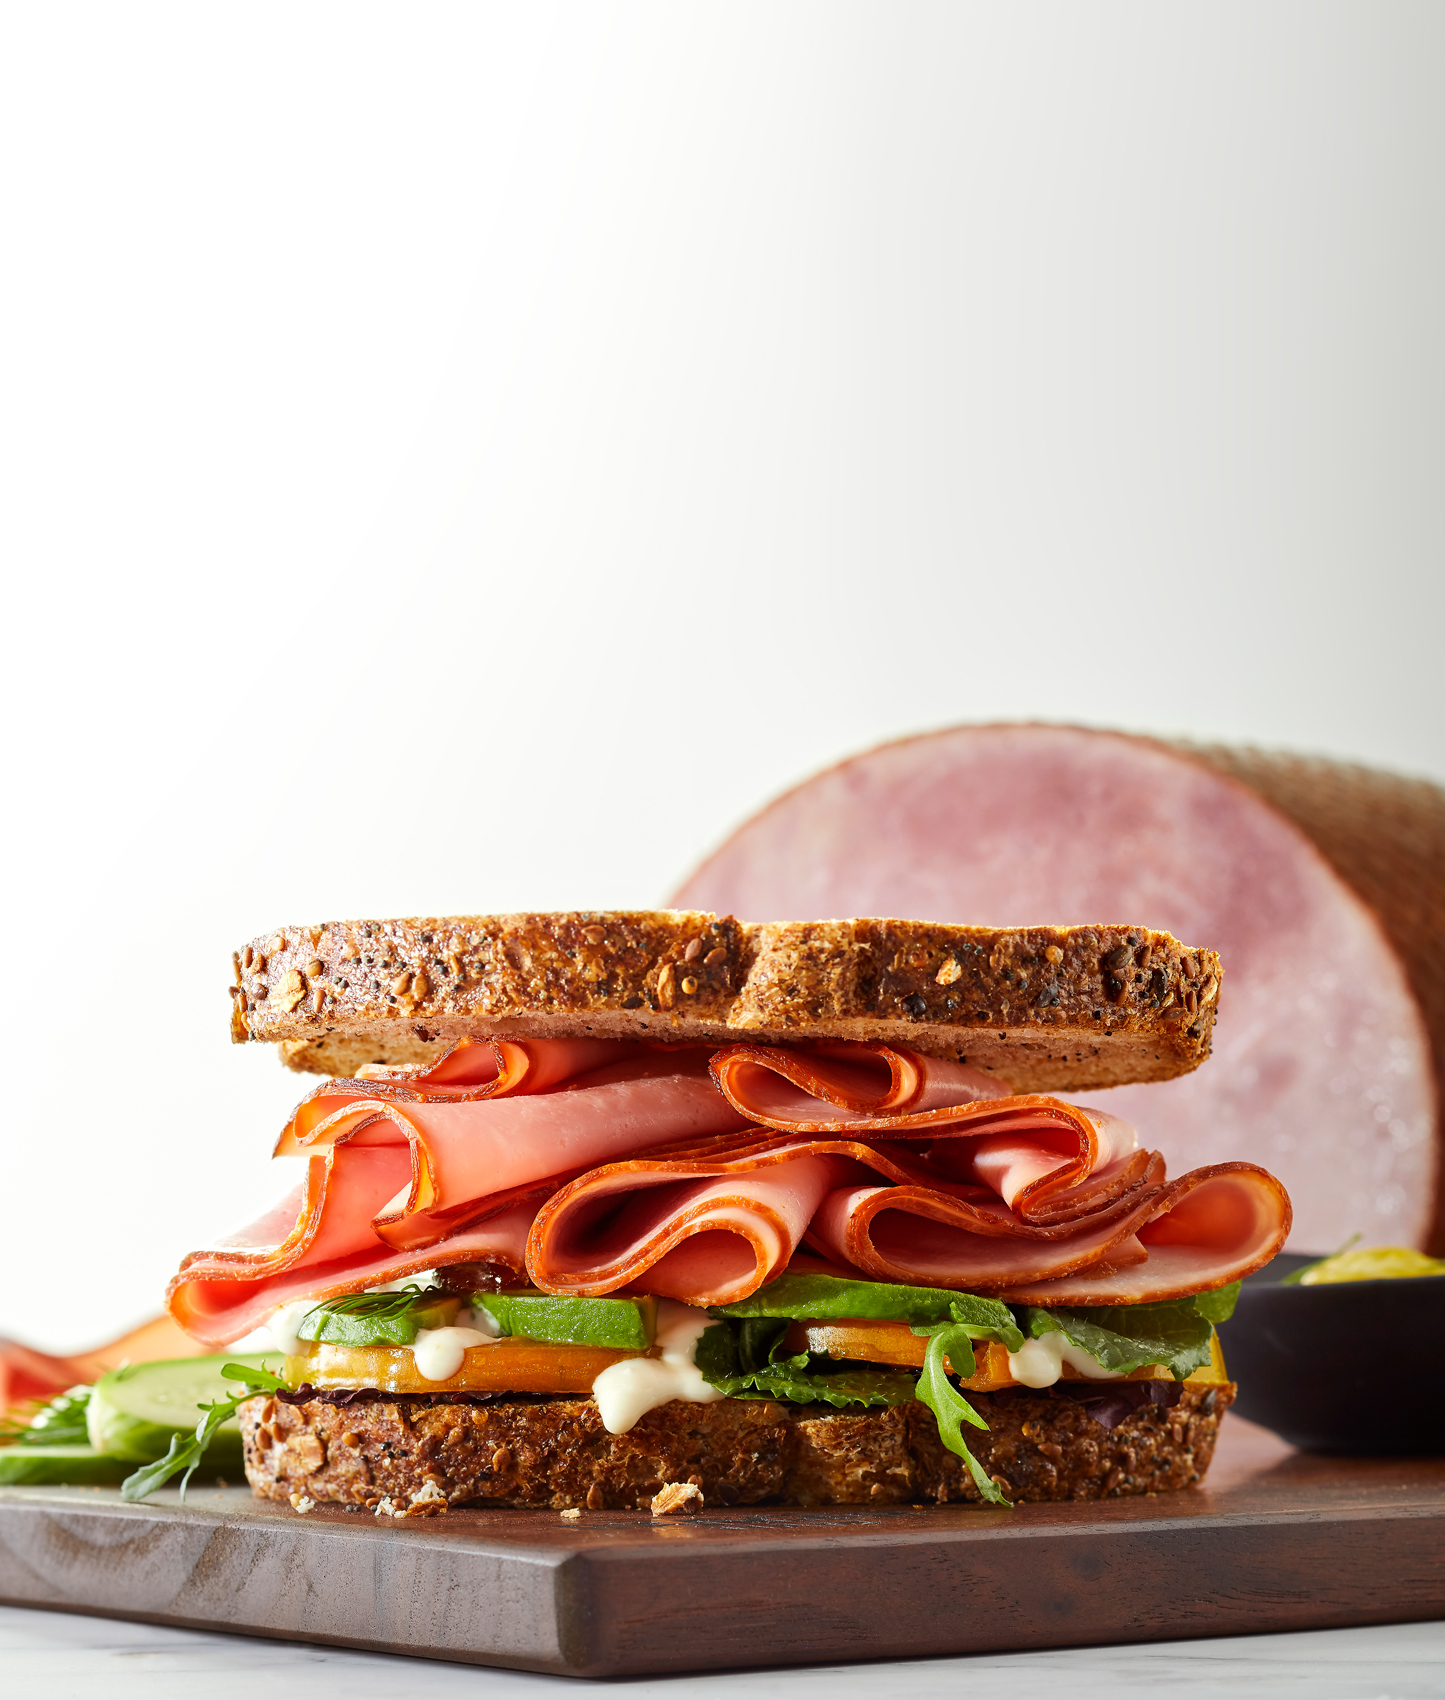 Badger Ham, Ham Sandwich photo by Chris Kessler Photography.  Chris Kessler is a freelance Photographer based in Milwaukee Wisconsin. Specializing in Food photography and portraiture. 